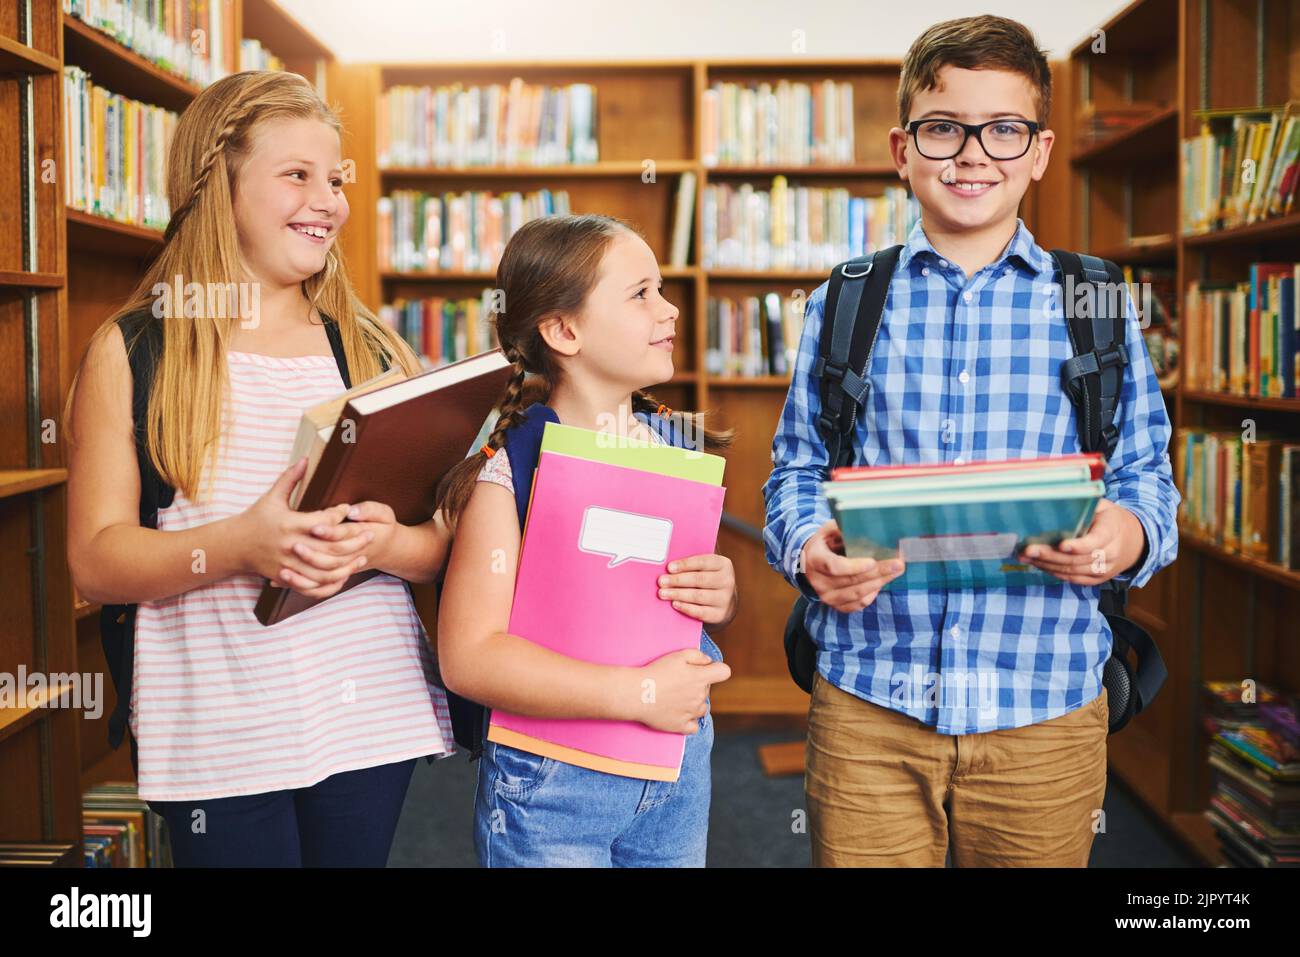 The girls are crazy about him. a group of young school kids holding books while standing inside of a library together during the day. Stock Photo